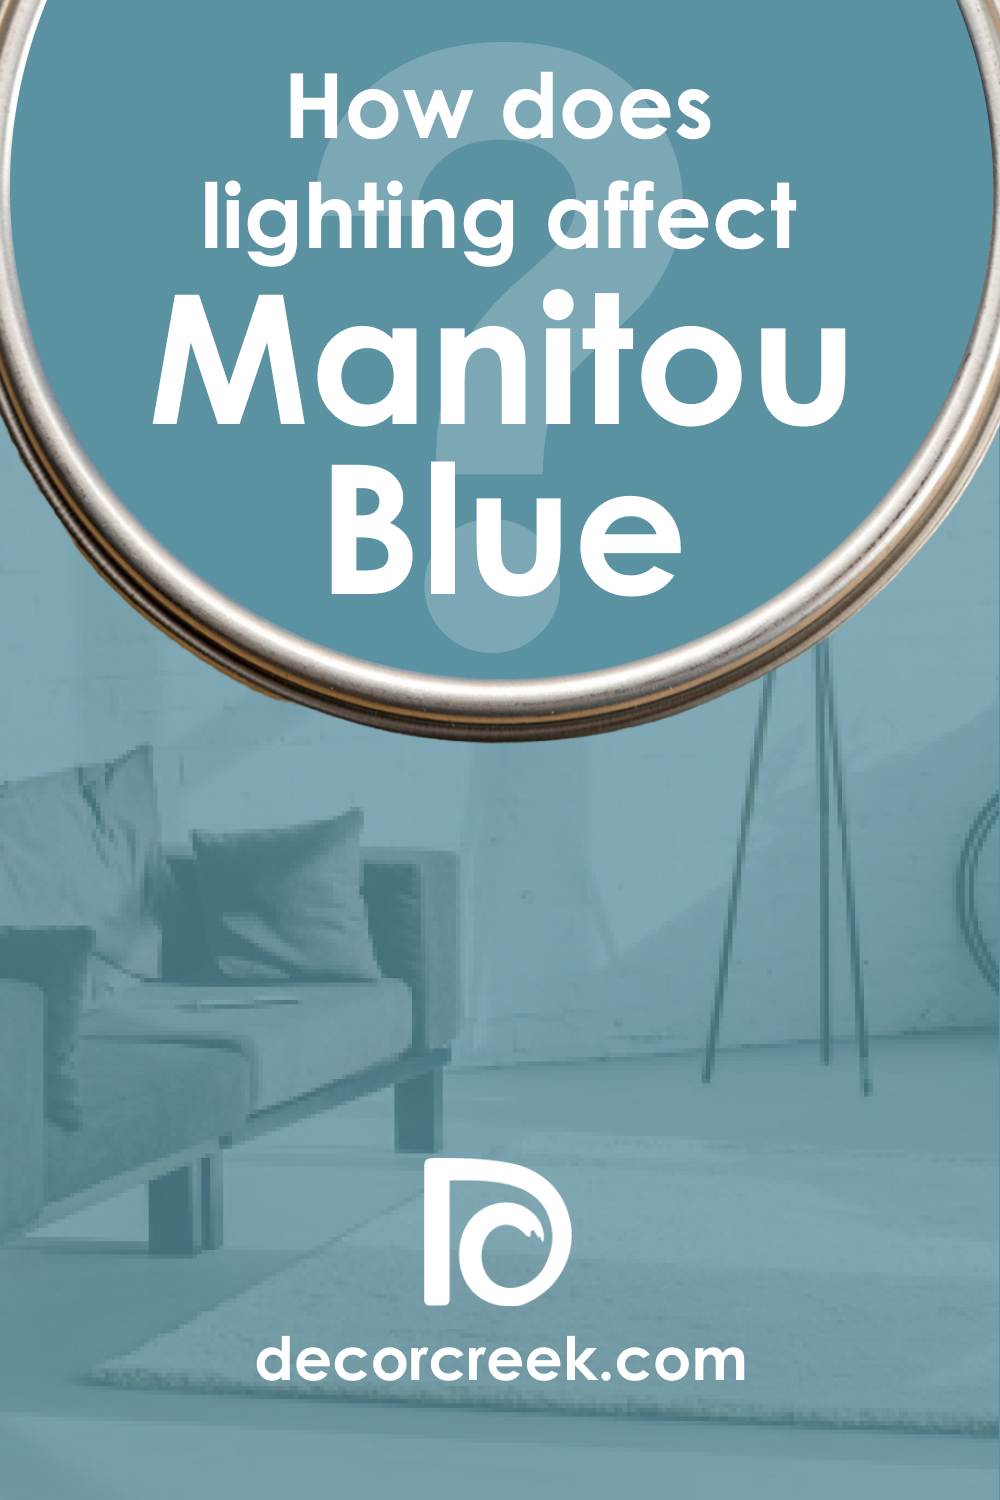 How Does Lighting Affect SW 6501 Manitou Blue?